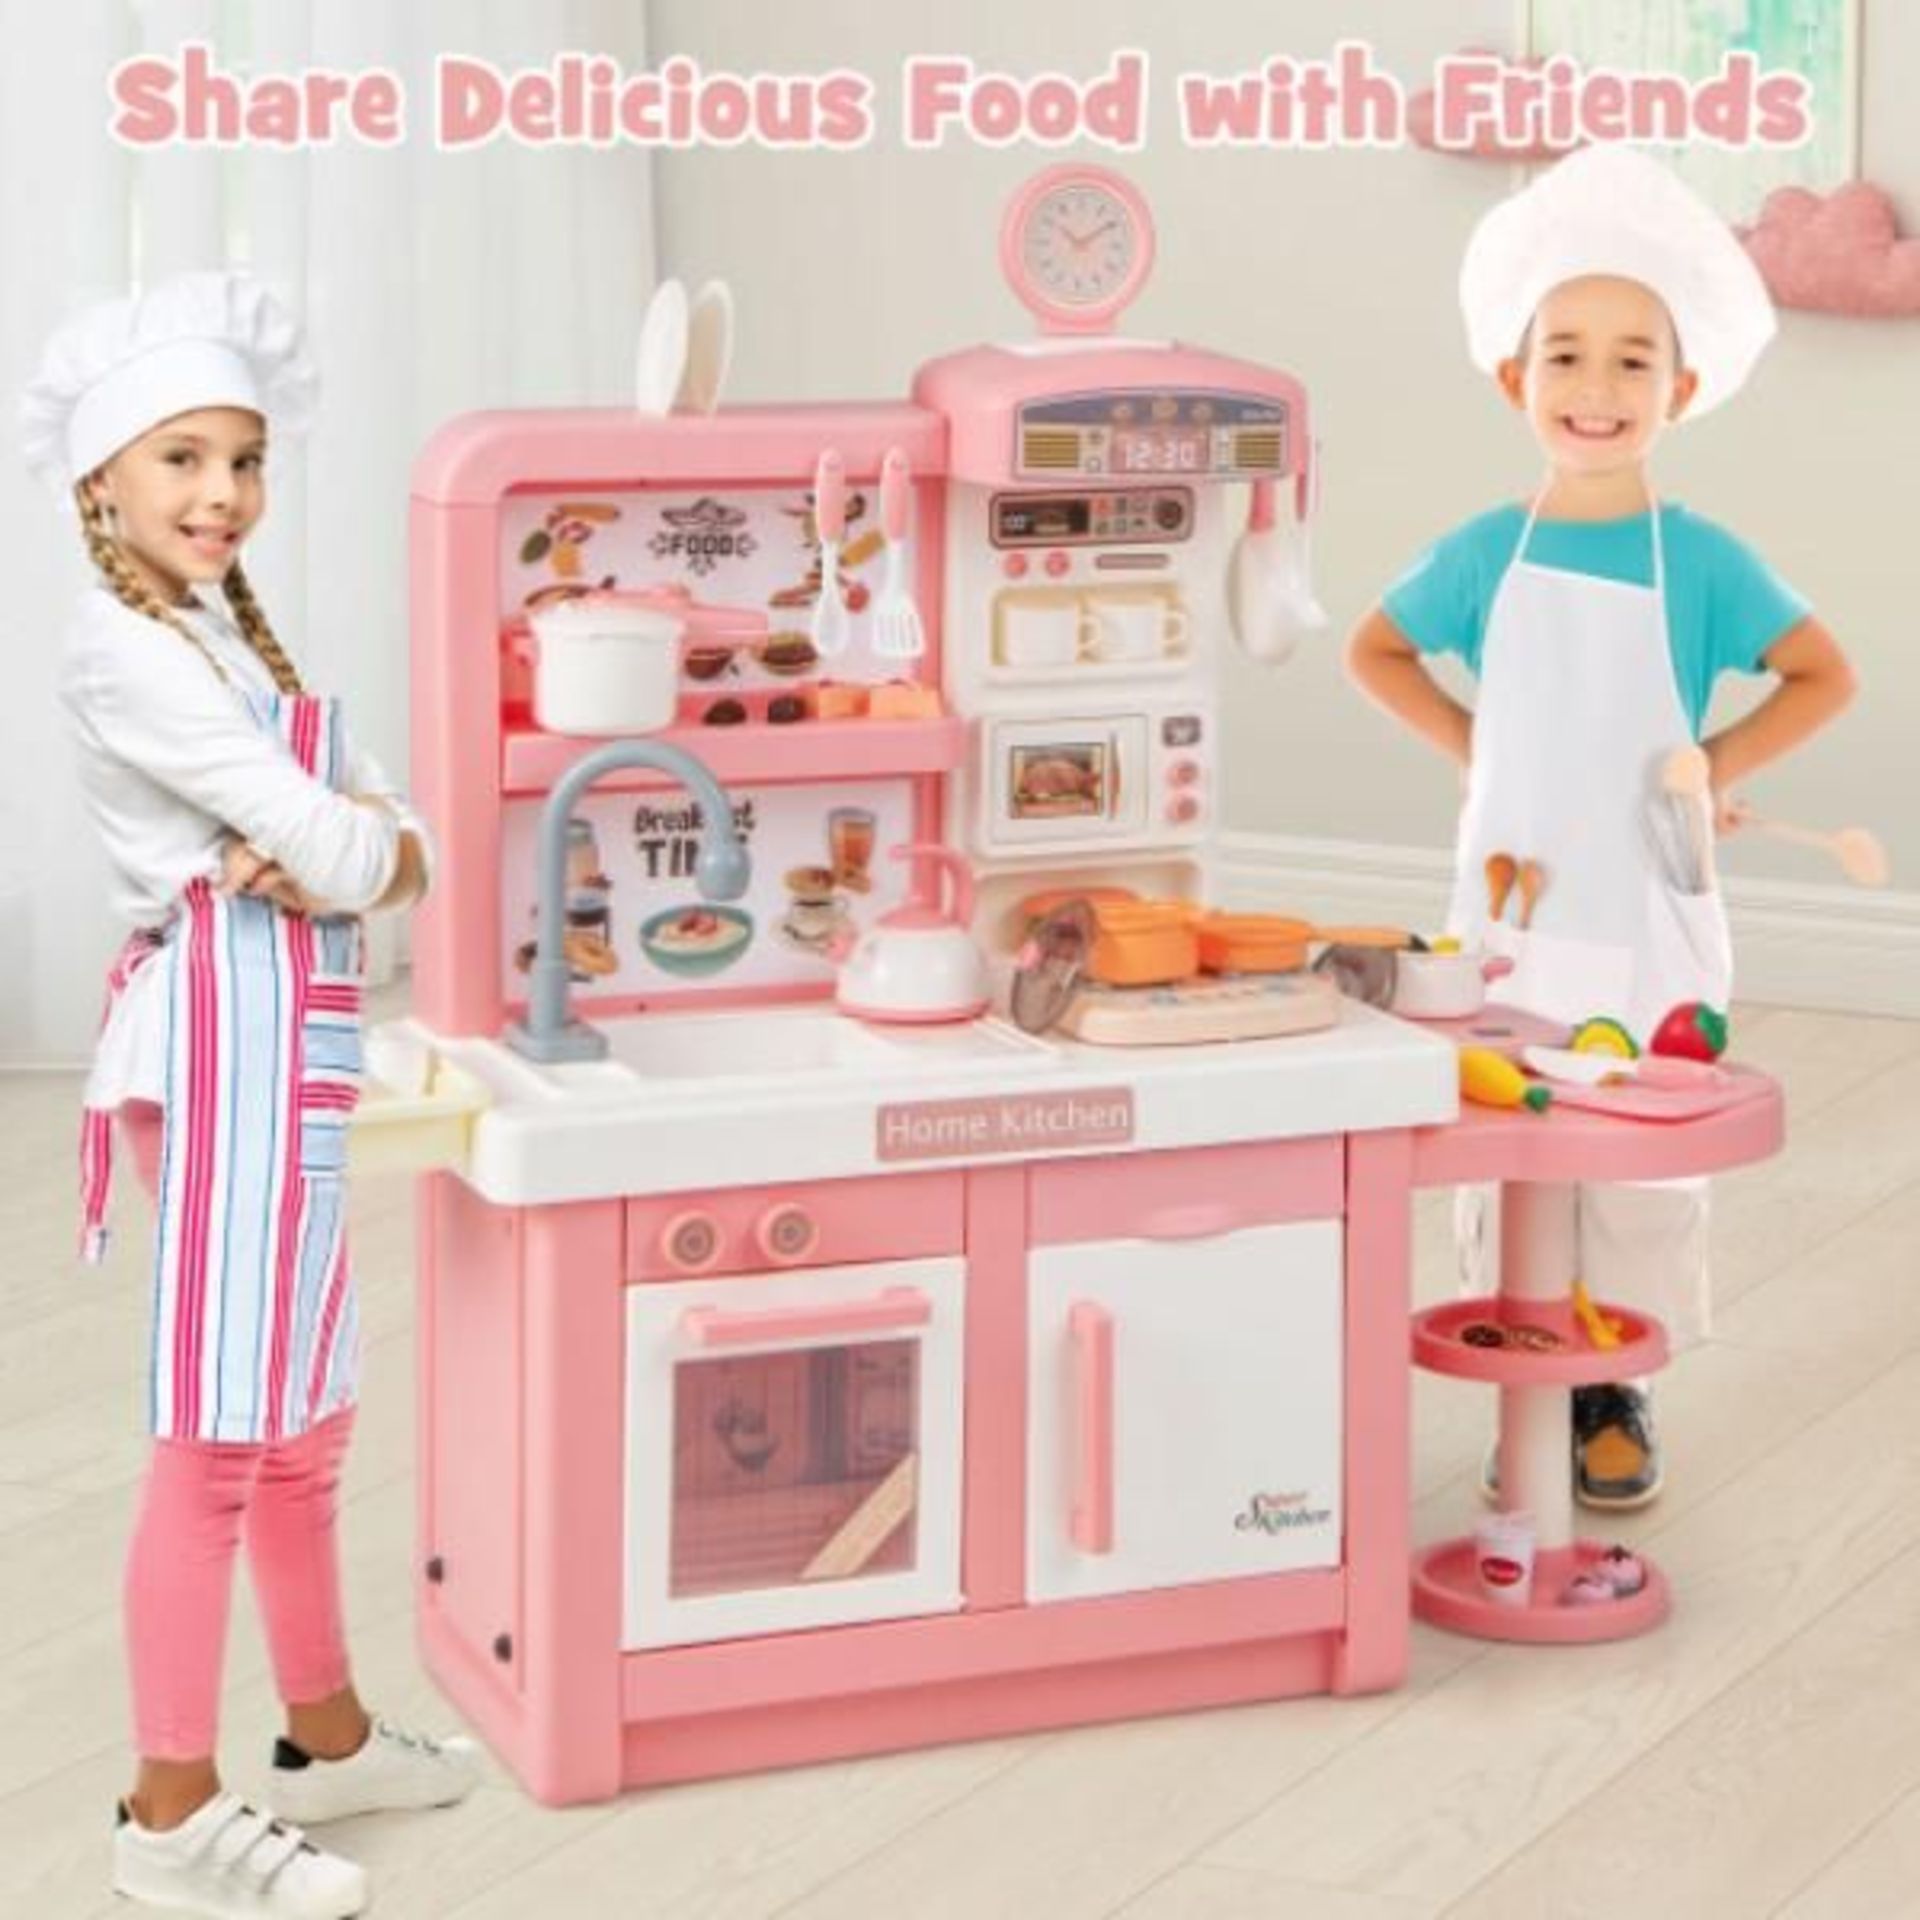 Kids Play Kitchen Toy With Stove Sink Oven With Light & Sound, Pink. - R14.7.